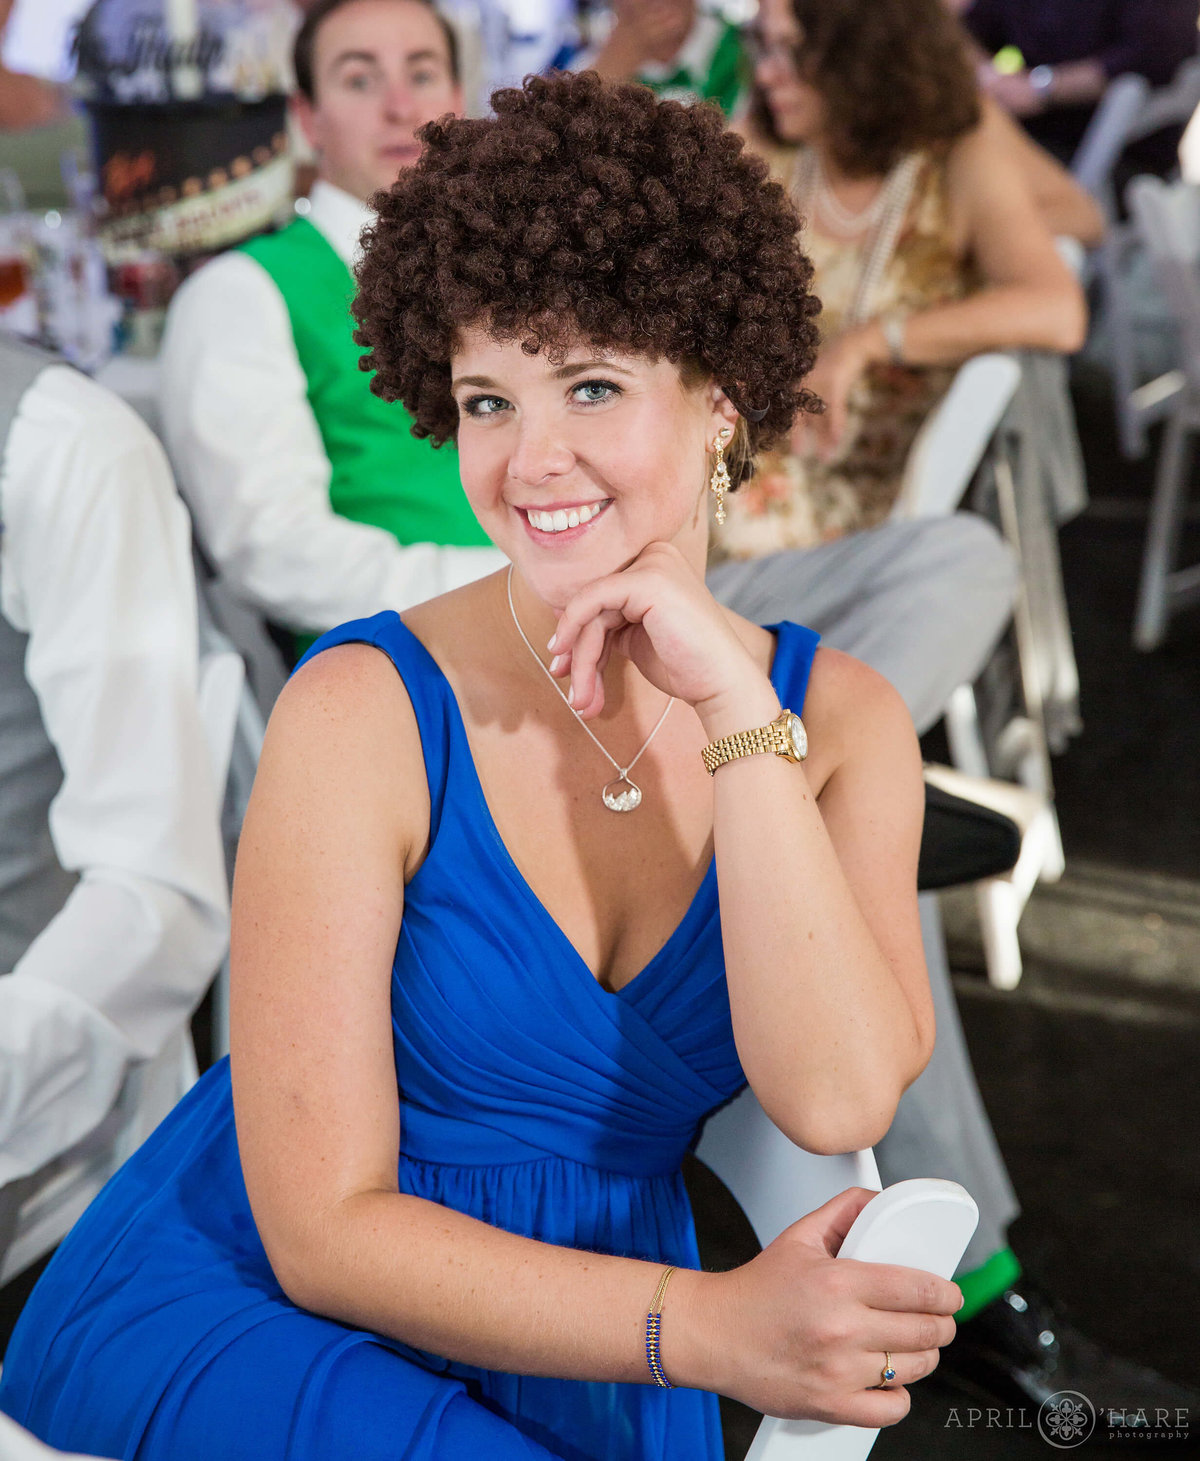 Bridesmaid wearing a silly wig at a Boulder Wedding Reception at Chautauqua Dining Hall